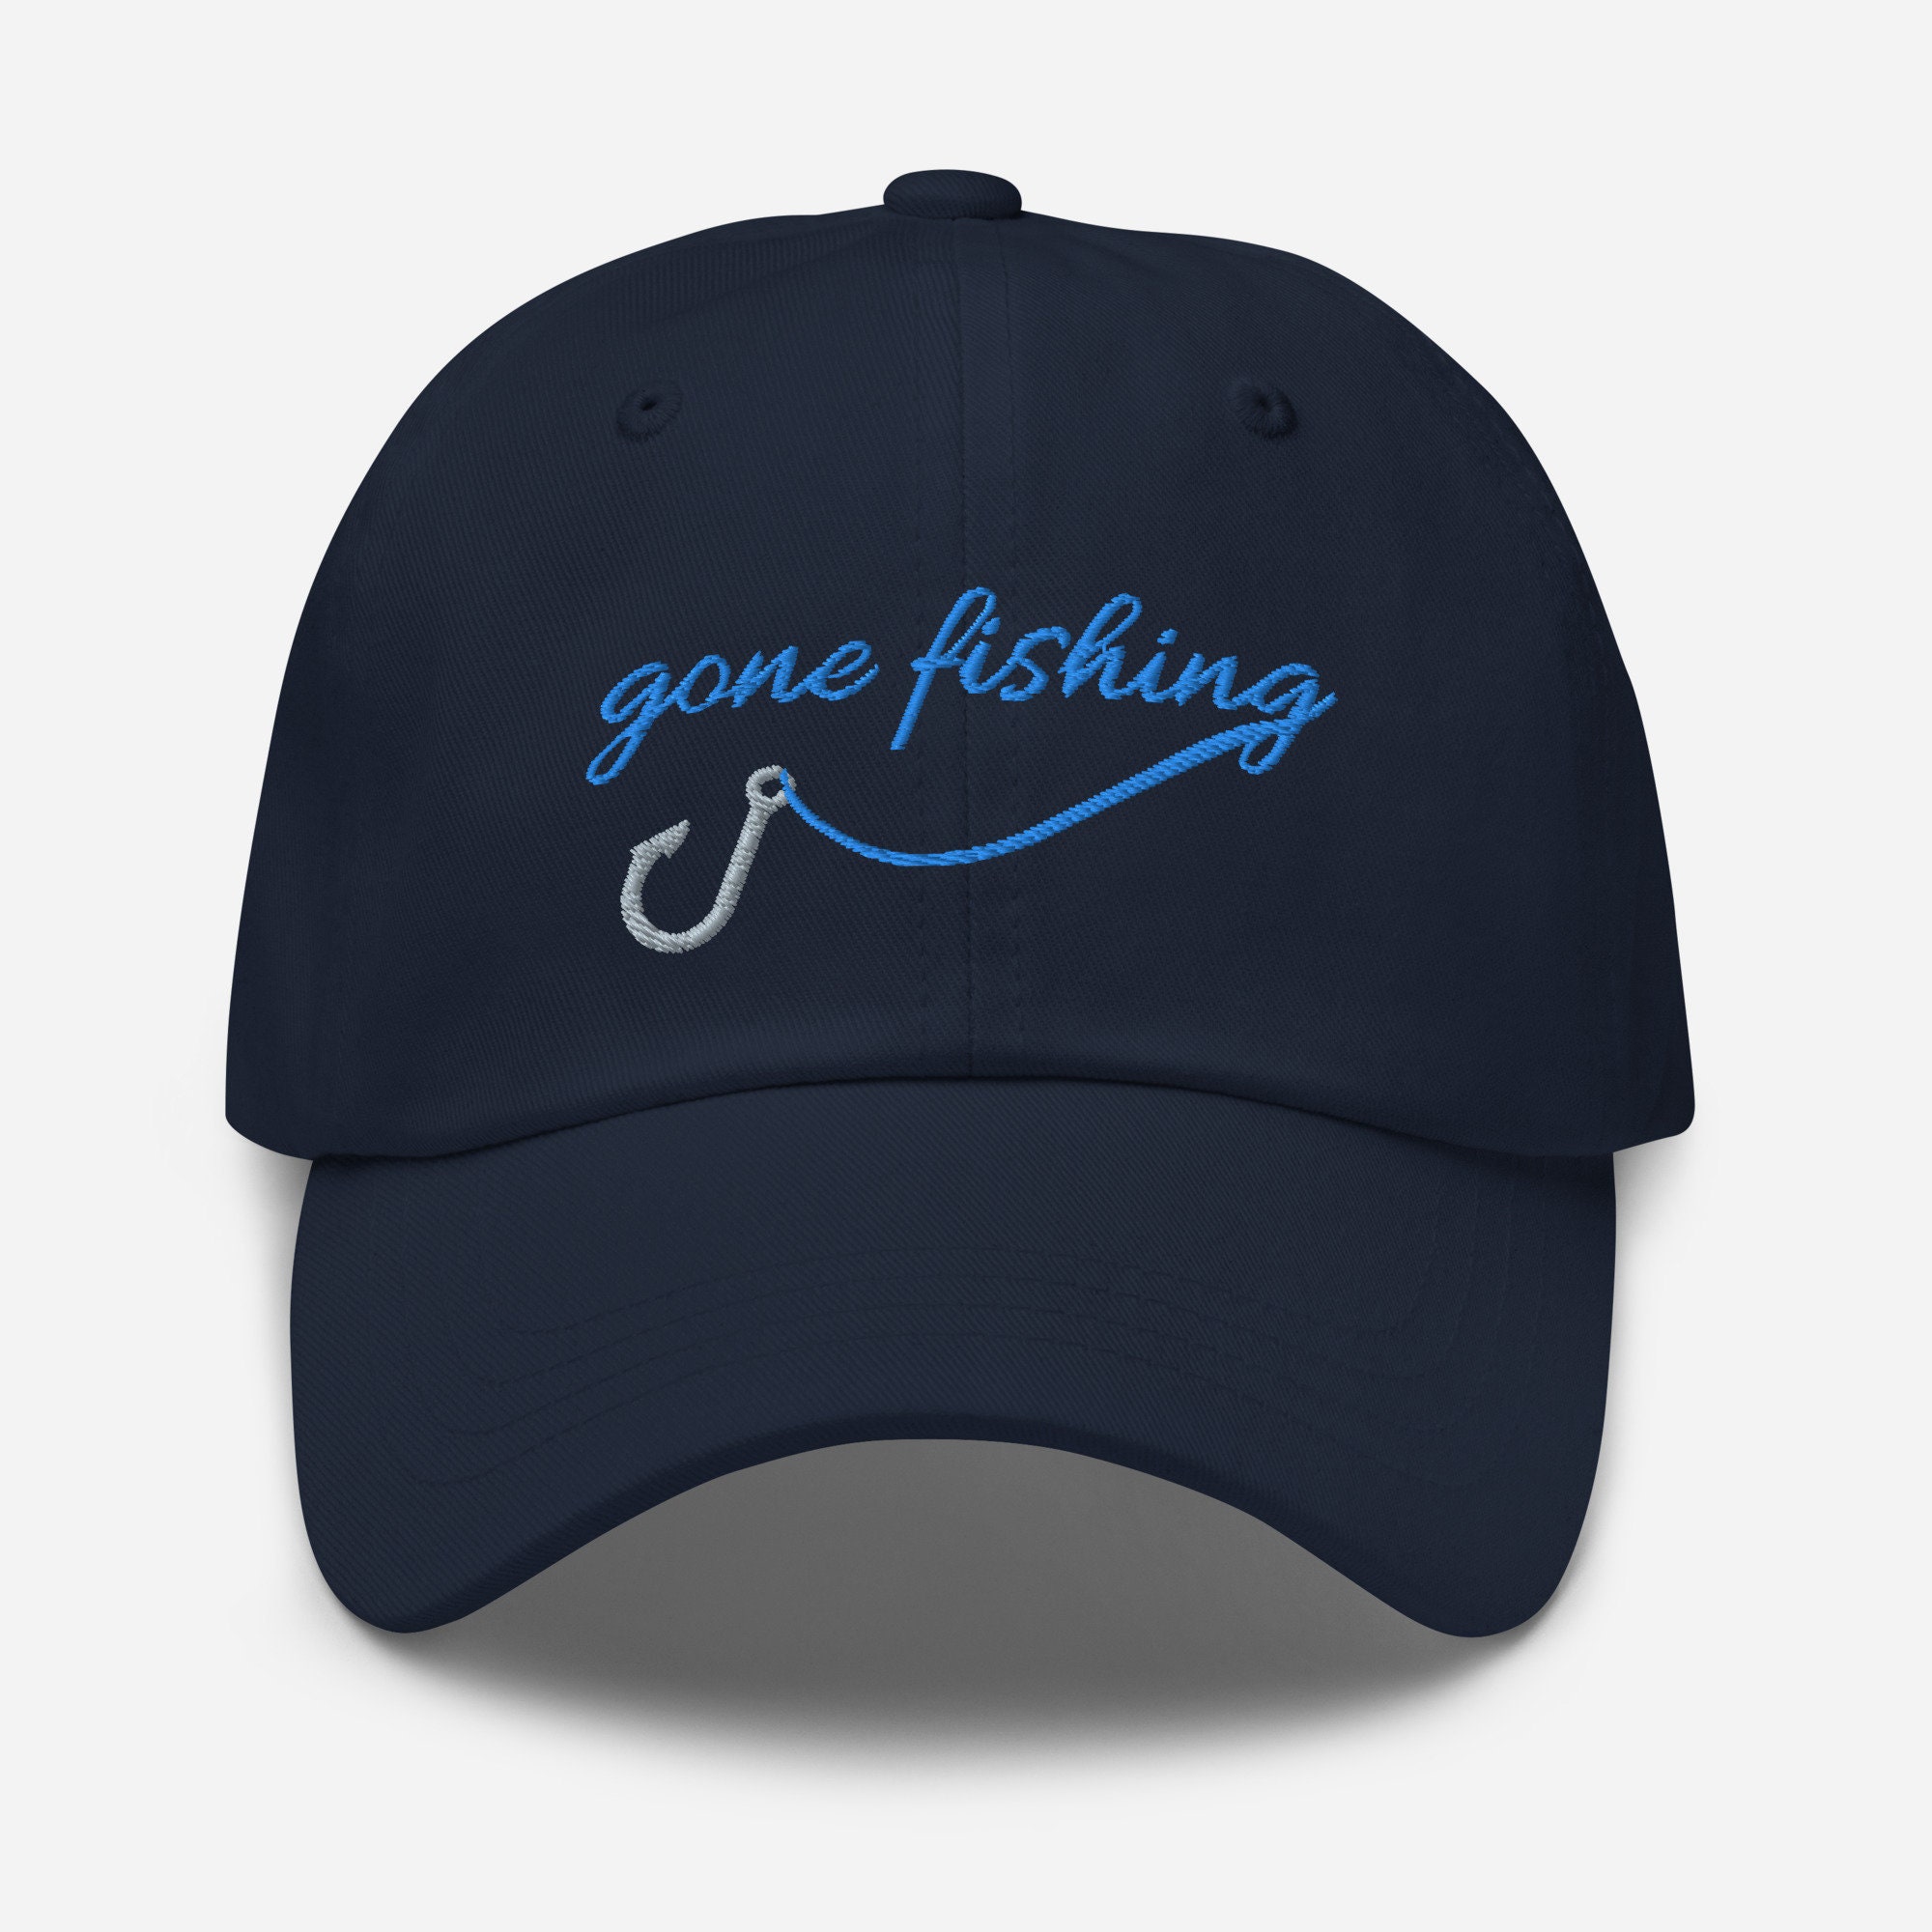 Gone Fishing Dad Hat Gift for Fishermen, Anglers and Nature Lovers  Minimalist Embroidered Cotton Hat -  Canada